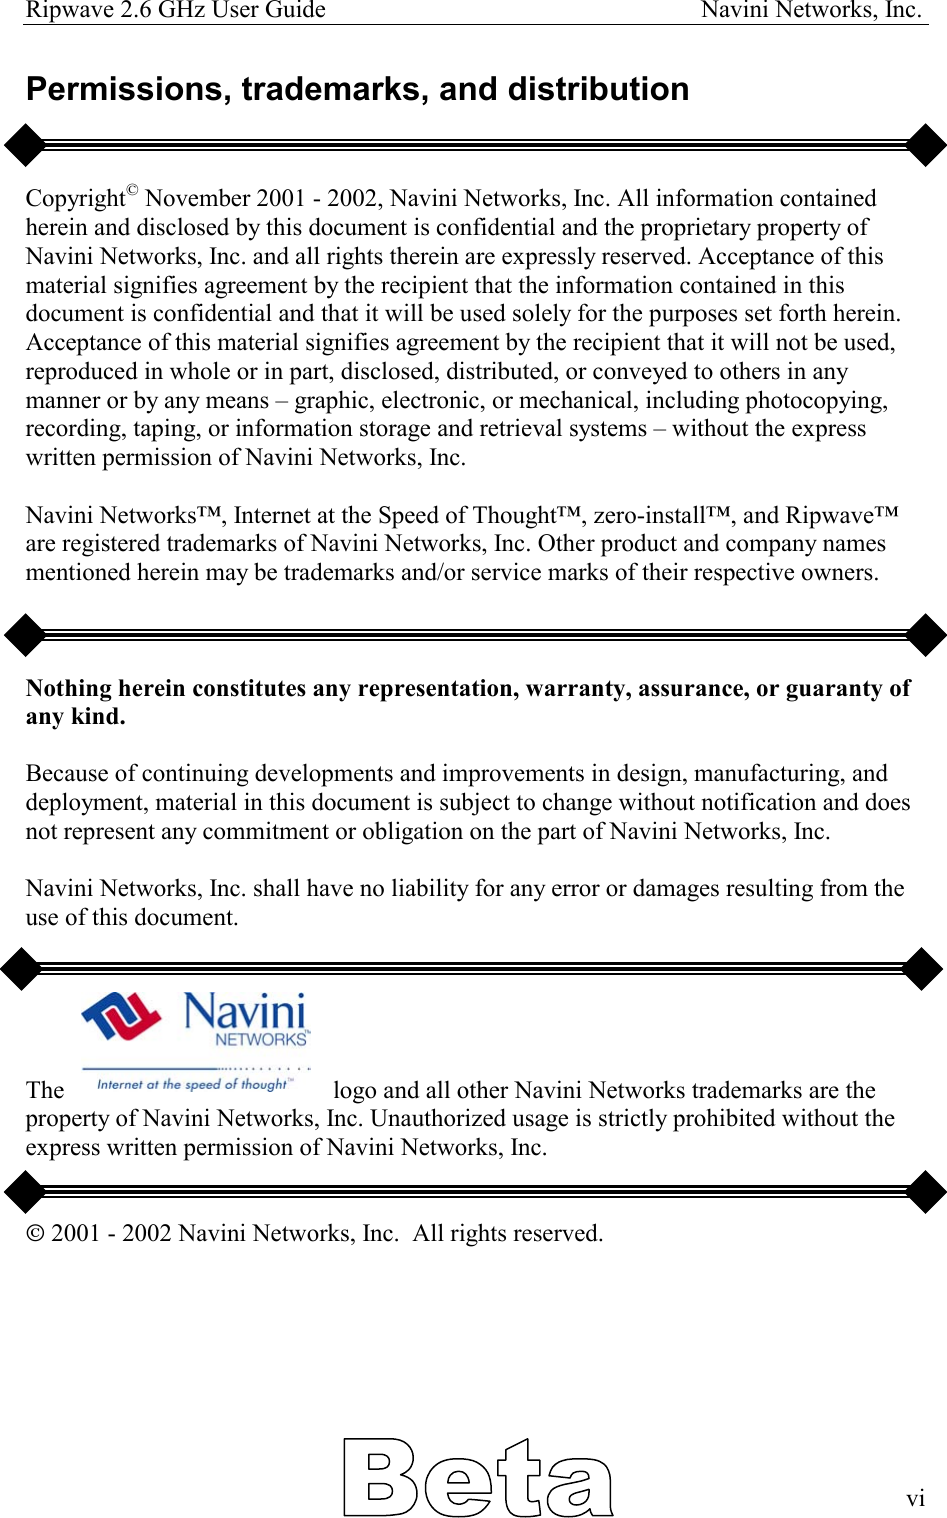 Ripwave 2.6 GHz User Guide                                                            Navini Networks, Inc. Permissions, trademarks, and distribution   Copyright© November 2001 - 2002, Navini Networks, Inc. All information contained herein and disclosed by this document is confidential and the proprietary property of Navini Networks, Inc. and all rights therein are expressly reserved. Acceptance of this material signifies agreement by the recipient that the information contained in this document is confidential and that it will be used solely for the purposes set forth herein. Acceptance of this material signifies agreement by the recipient that it will not be used, reproduced in whole or in part, disclosed, distributed, or conveyed to others in any manner or by any means – graphic, electronic, or mechanical, including photocopying, recording, taping, or information storage and retrieval systems – without the express written permission of Navini Networks, Inc.  Navini Networks™, Internet at the Speed of Thought™, zero-install™, and Ripwave™ are registered trademarks of Navini Networks, Inc. Other product and company names mentioned herein may be trademarks and/or service marks of their respective owners.    Nothing herein constitutes any representation, warranty, assurance, or guaranty of any kind.  Because of continuing developments and improvements in design, manufacturing, and deployment, material in this document is subject to change without notification and does not represent any commitment or obligation on the part of Navini Networks, Inc.  Navini Networks, Inc. shall have no liability for any error or damages resulting from the use of this document.      The                                           logo and all other Navini Networks trademarks are the property of Navini Networks, Inc. Unauthorized usage is strictly prohibited without the express written permission of Navini Networks, Inc.   Ó 2001 - 2002 Navini Networks, Inc.  All rights reserved.        vi  